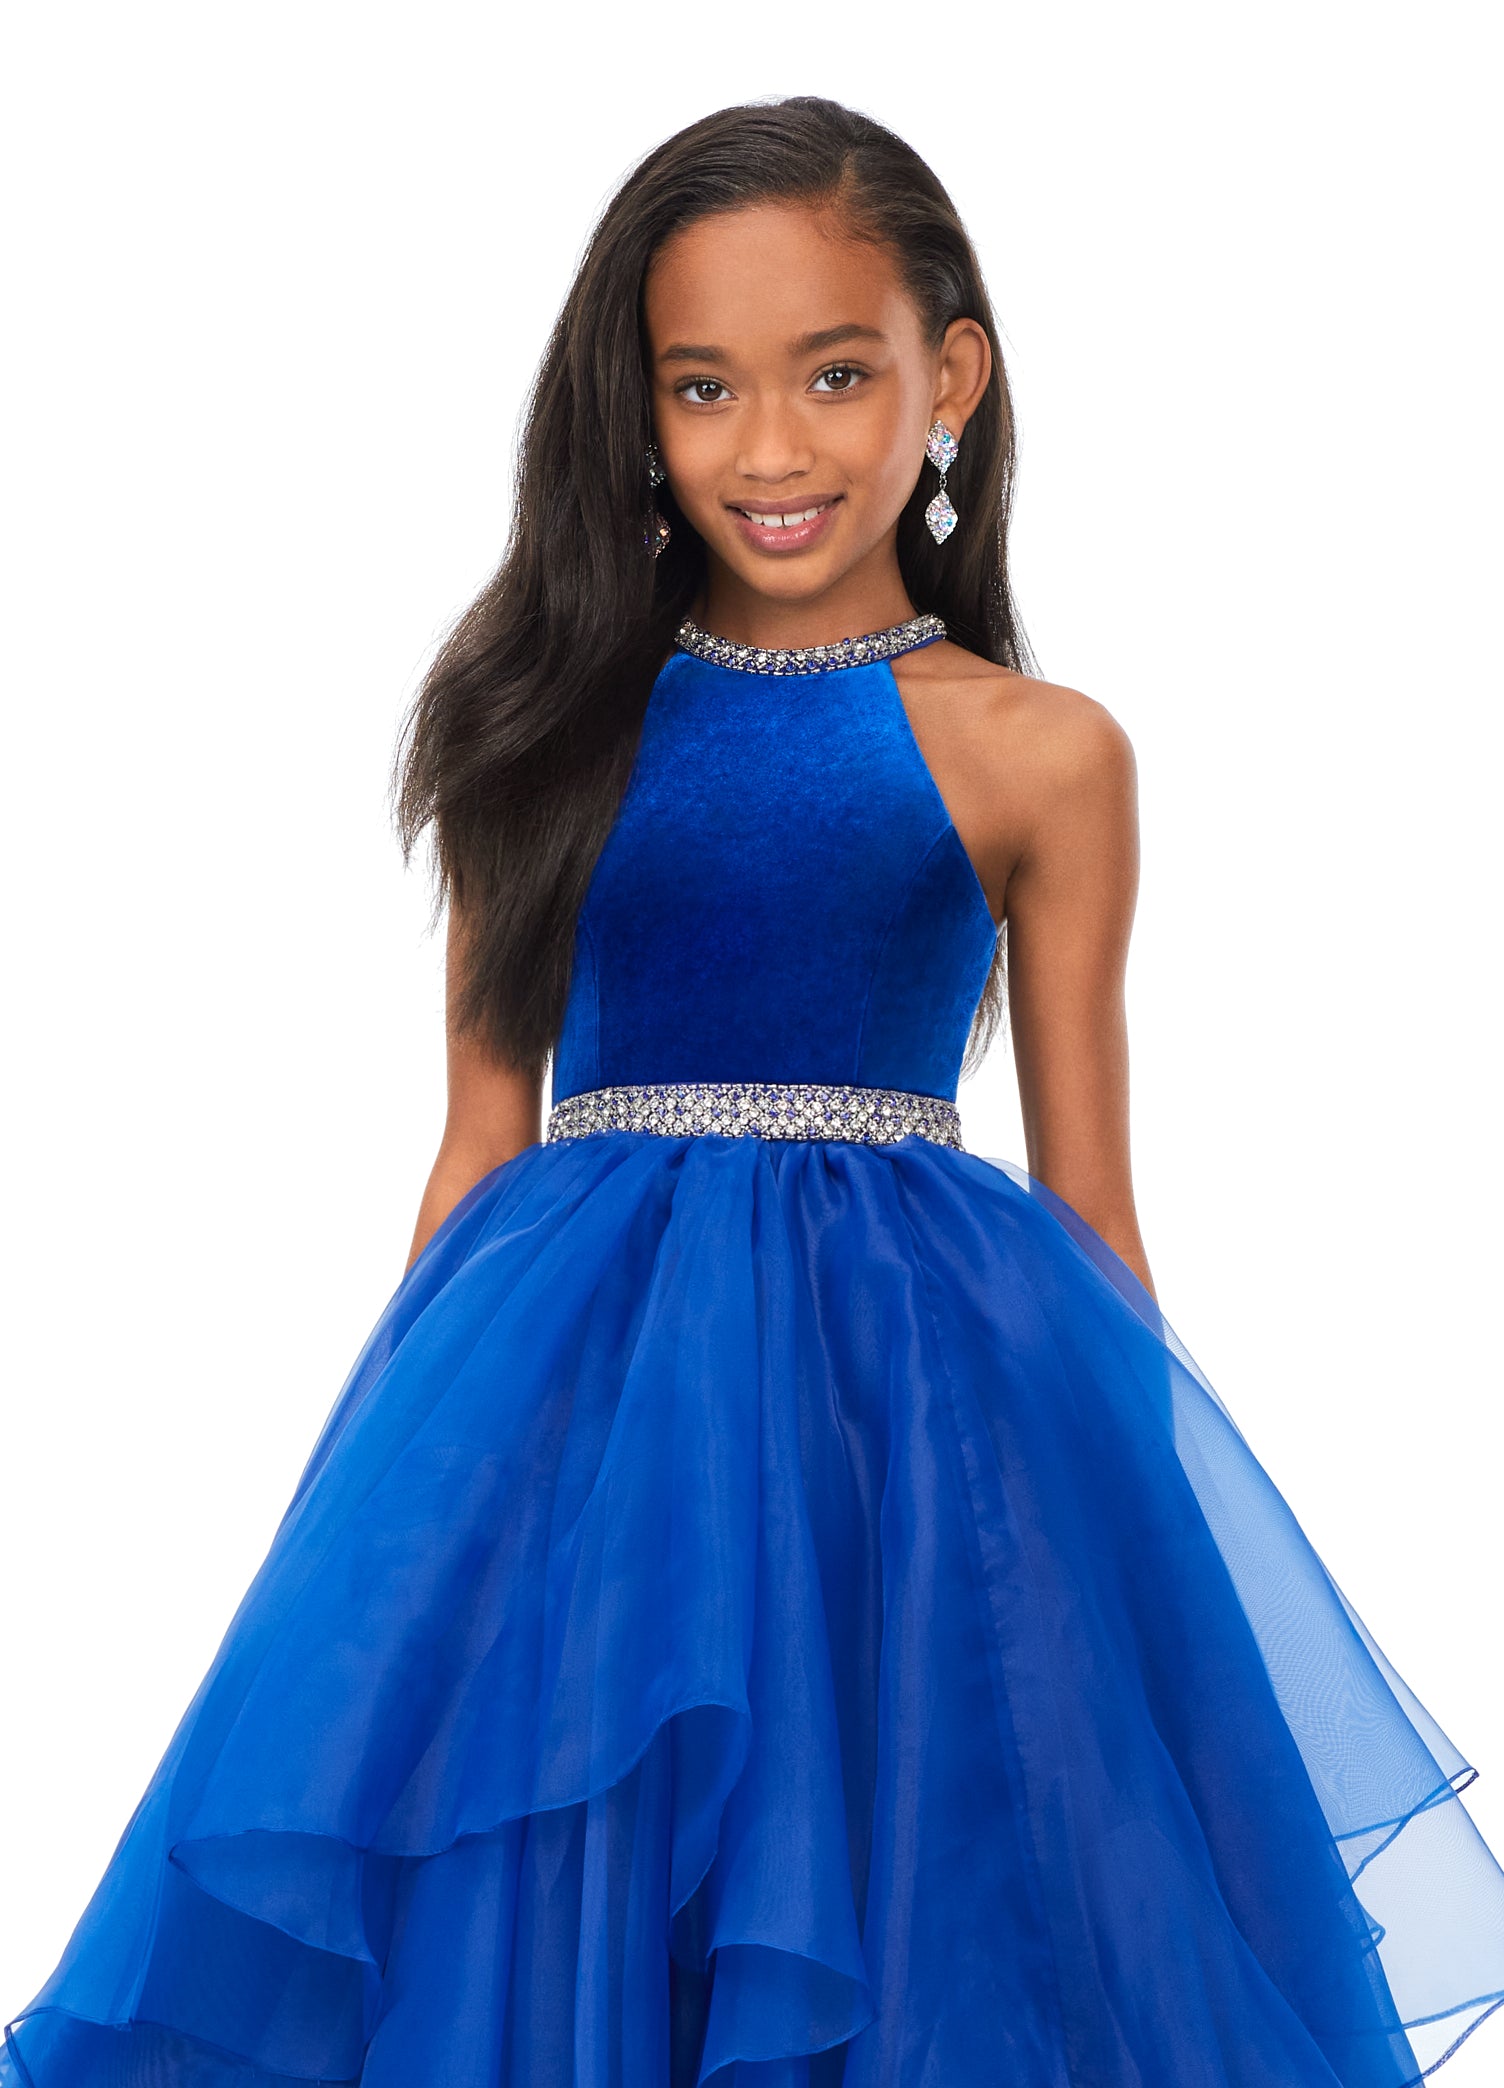 Princess Kids Flower Girls Tulle Party Dress Formal Wedding Bridesmaid Prom  Gown | eBay